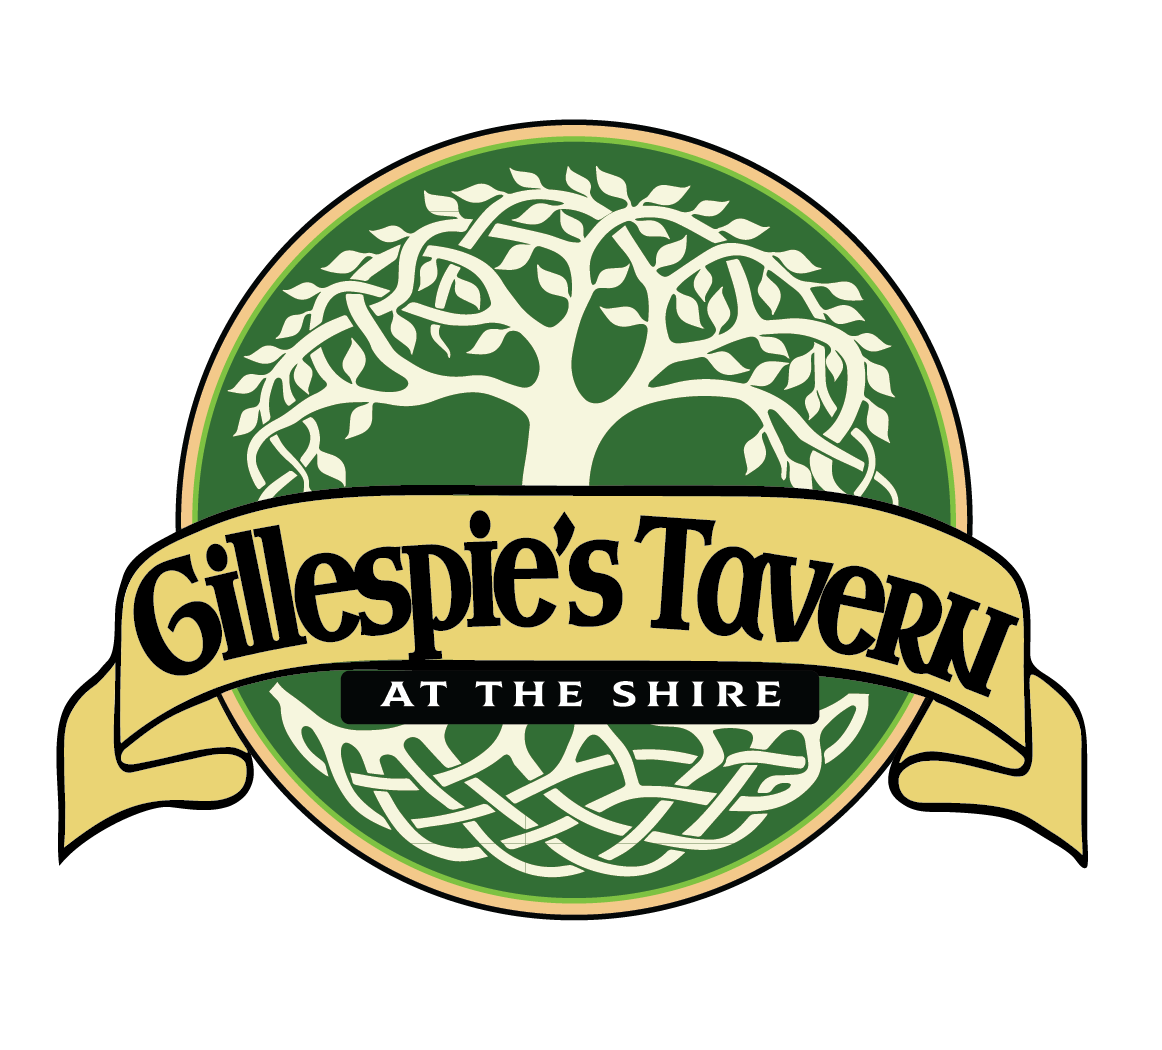 Gillespie's Tavern at the Shire logo scroll